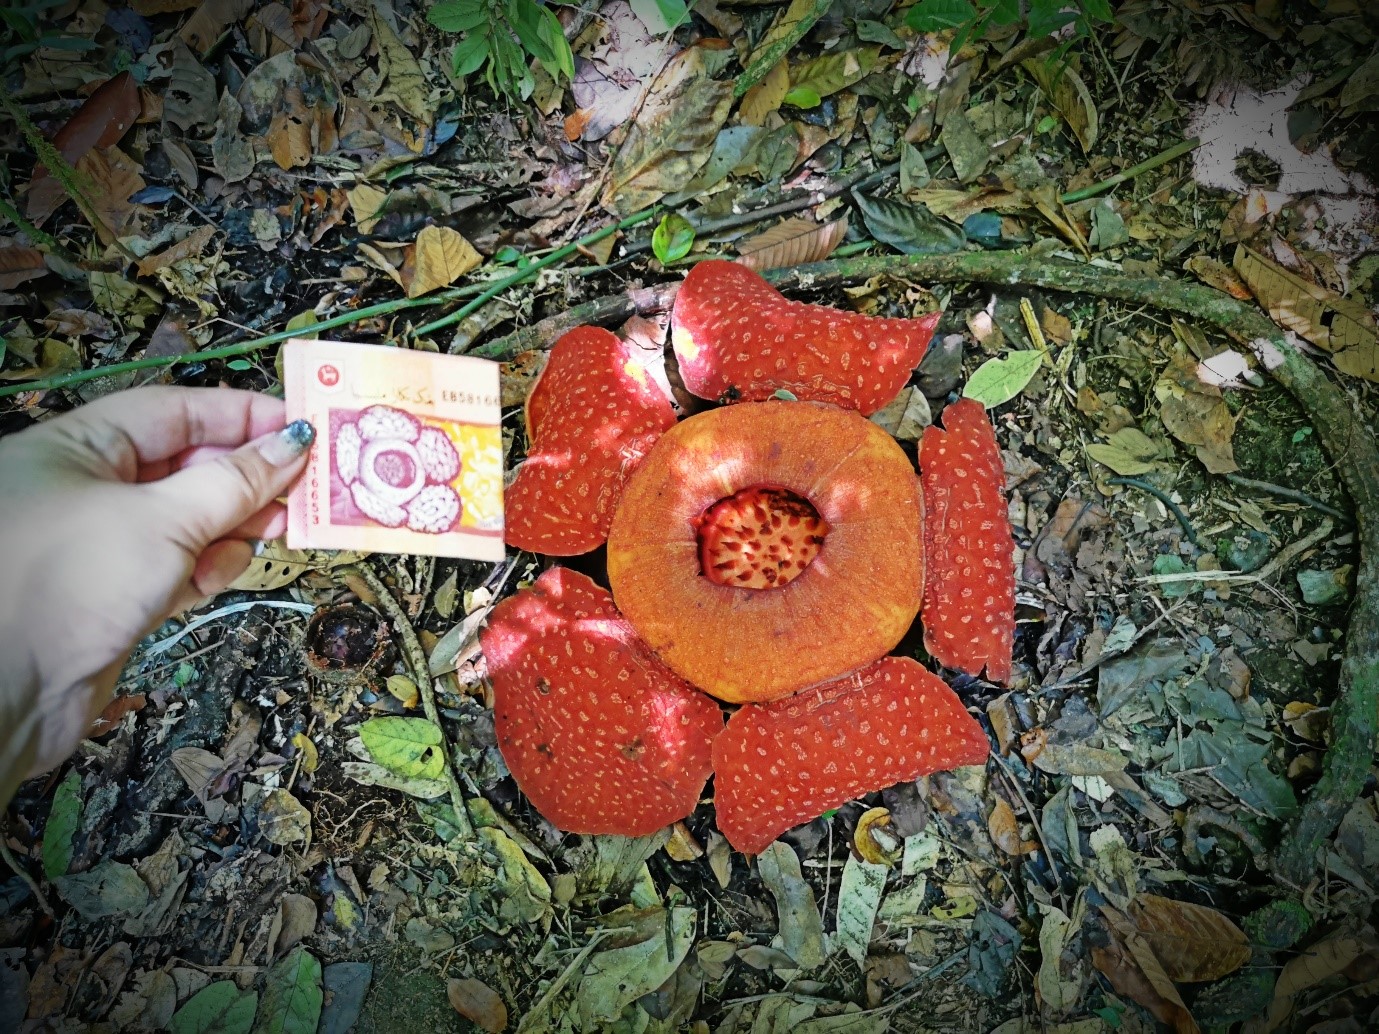 The Rafflesia is classified as the largest flower in the world.